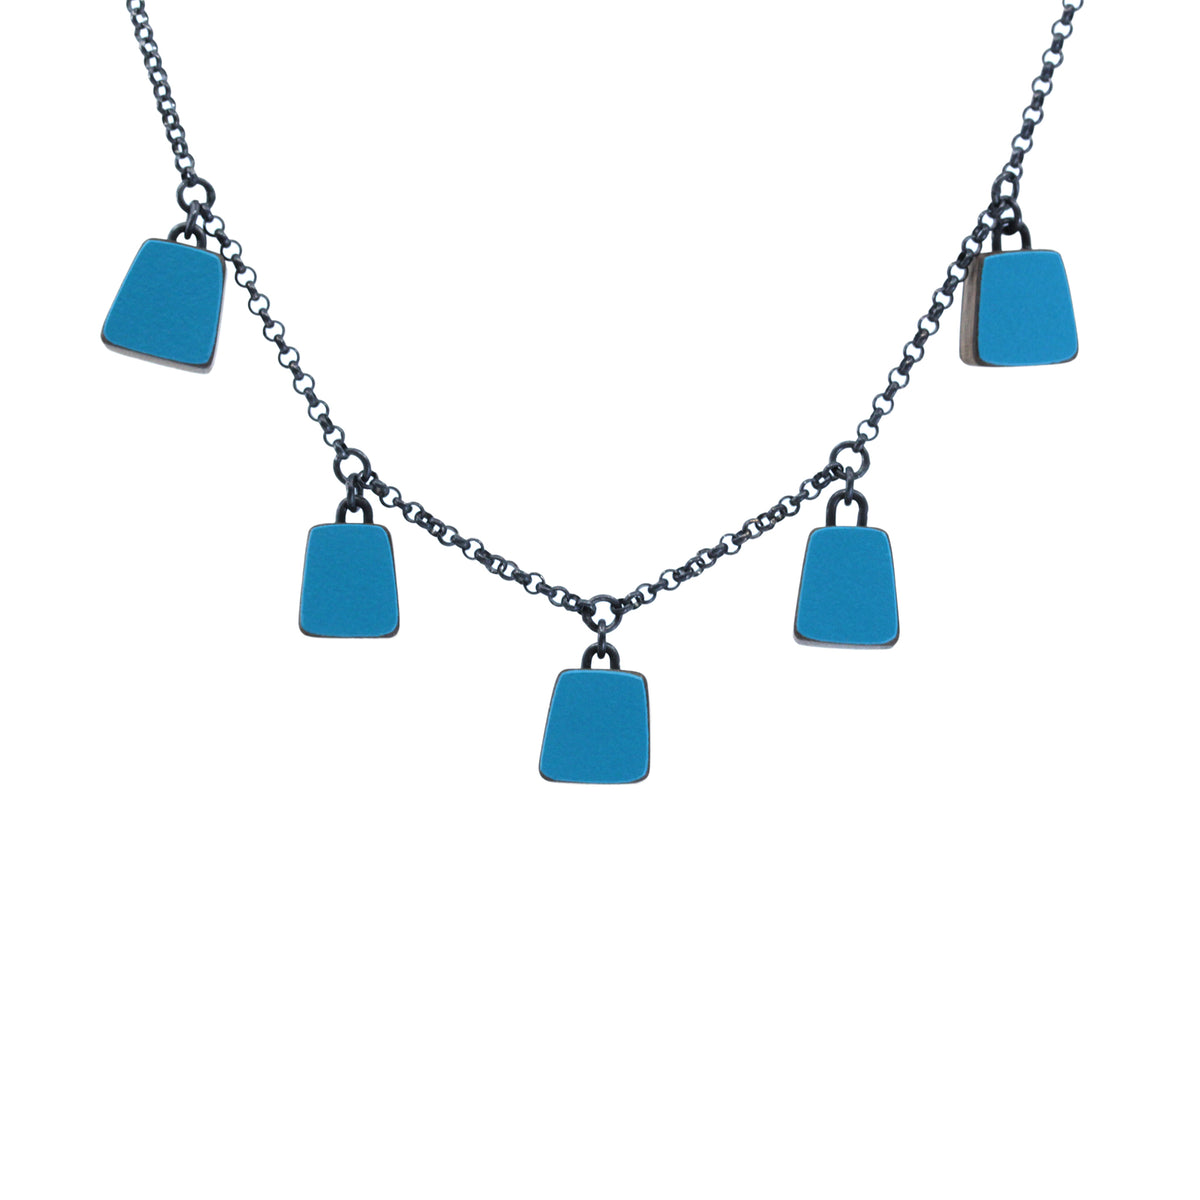 Five bell necklace - reversible